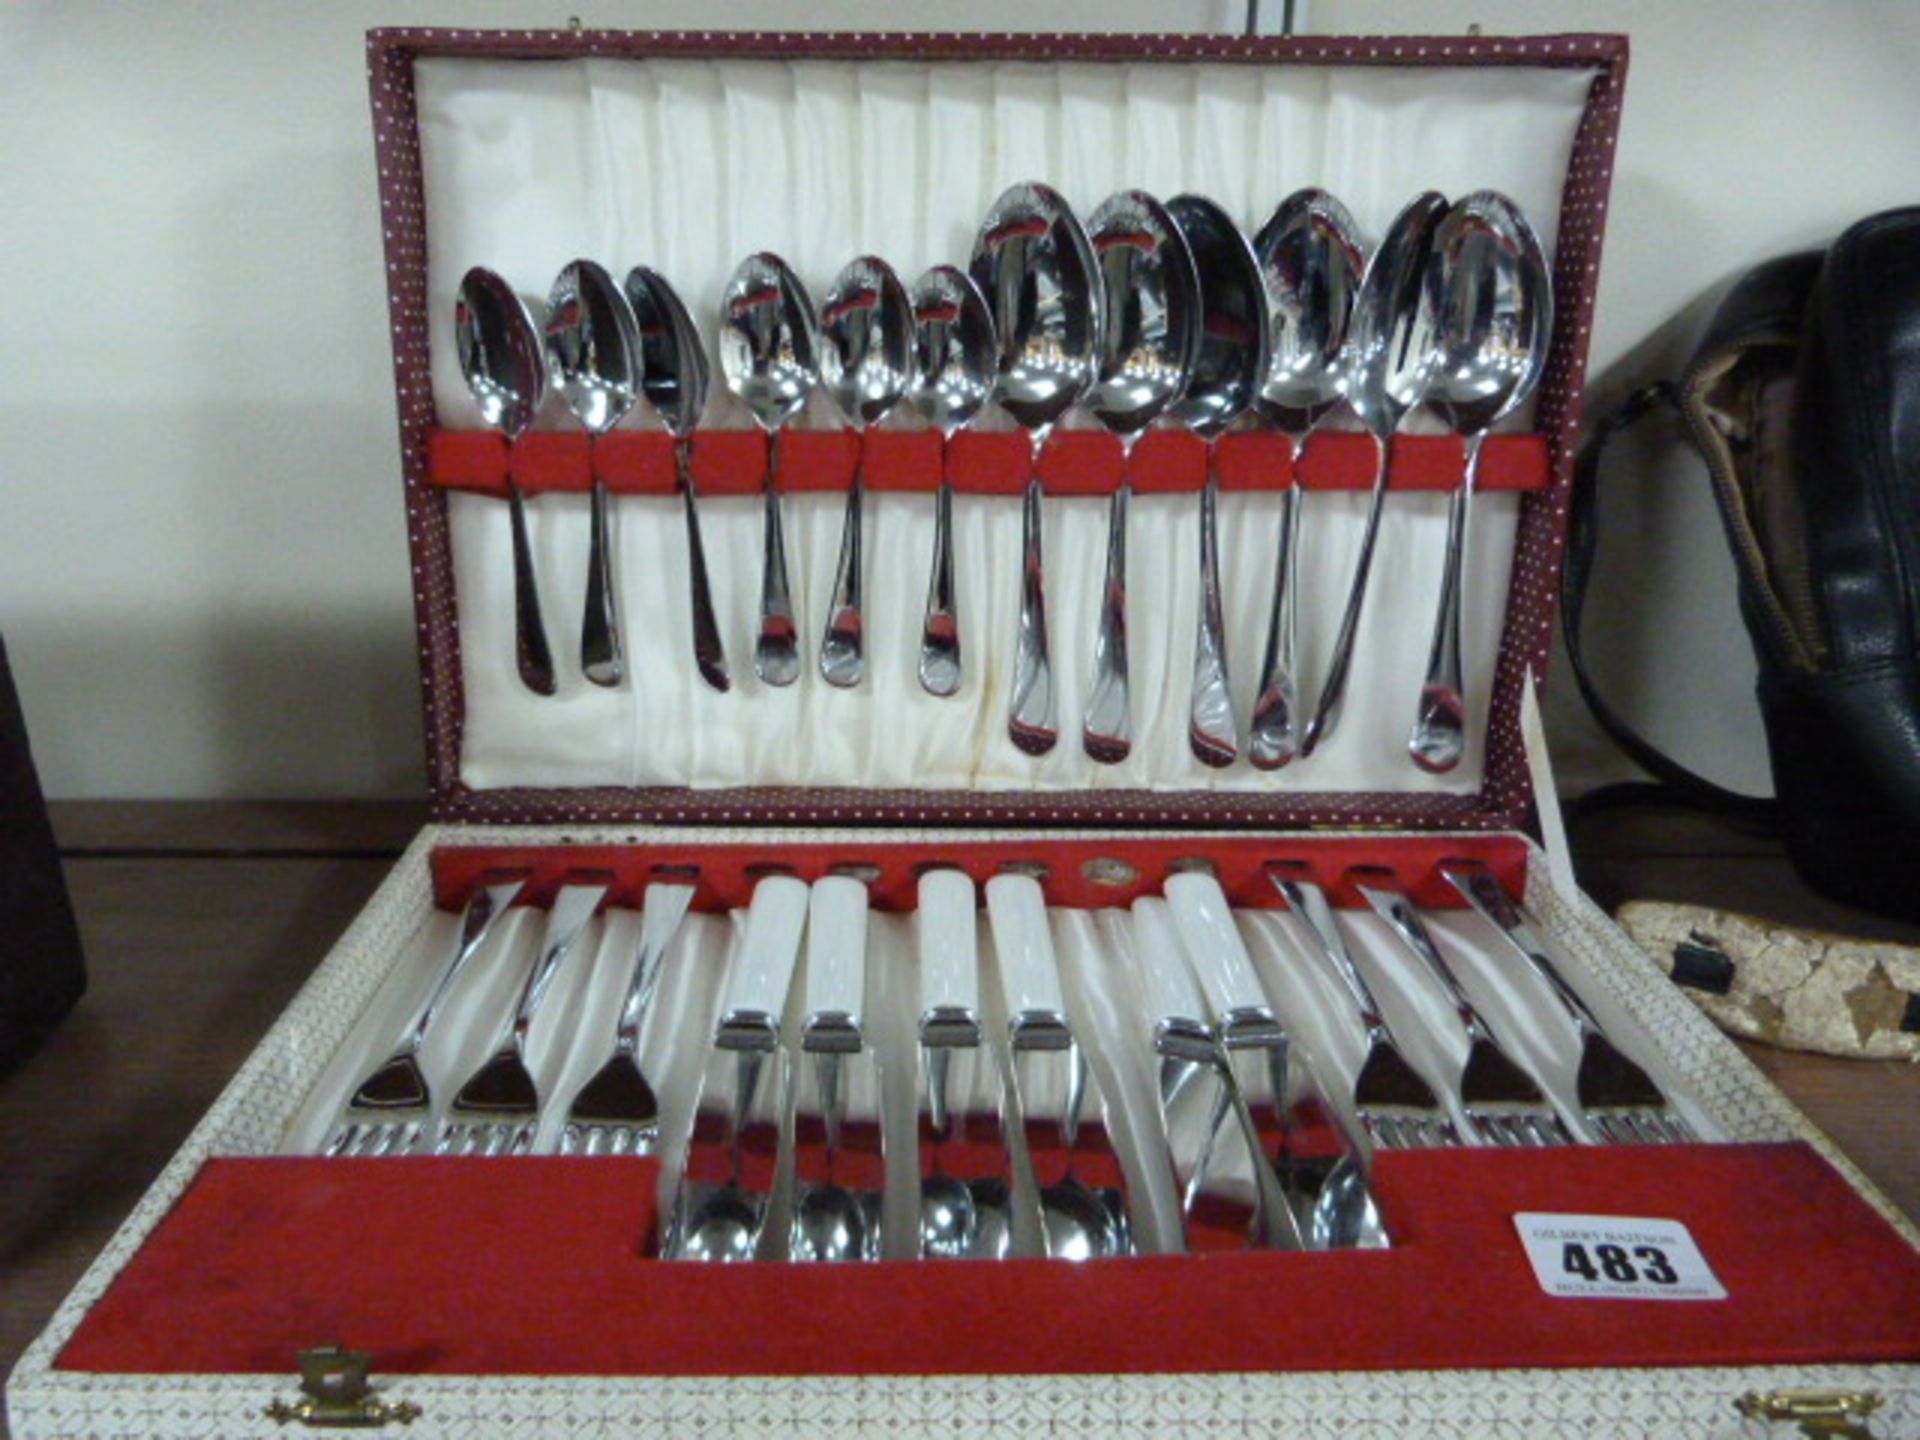 Canteen of Cutlery